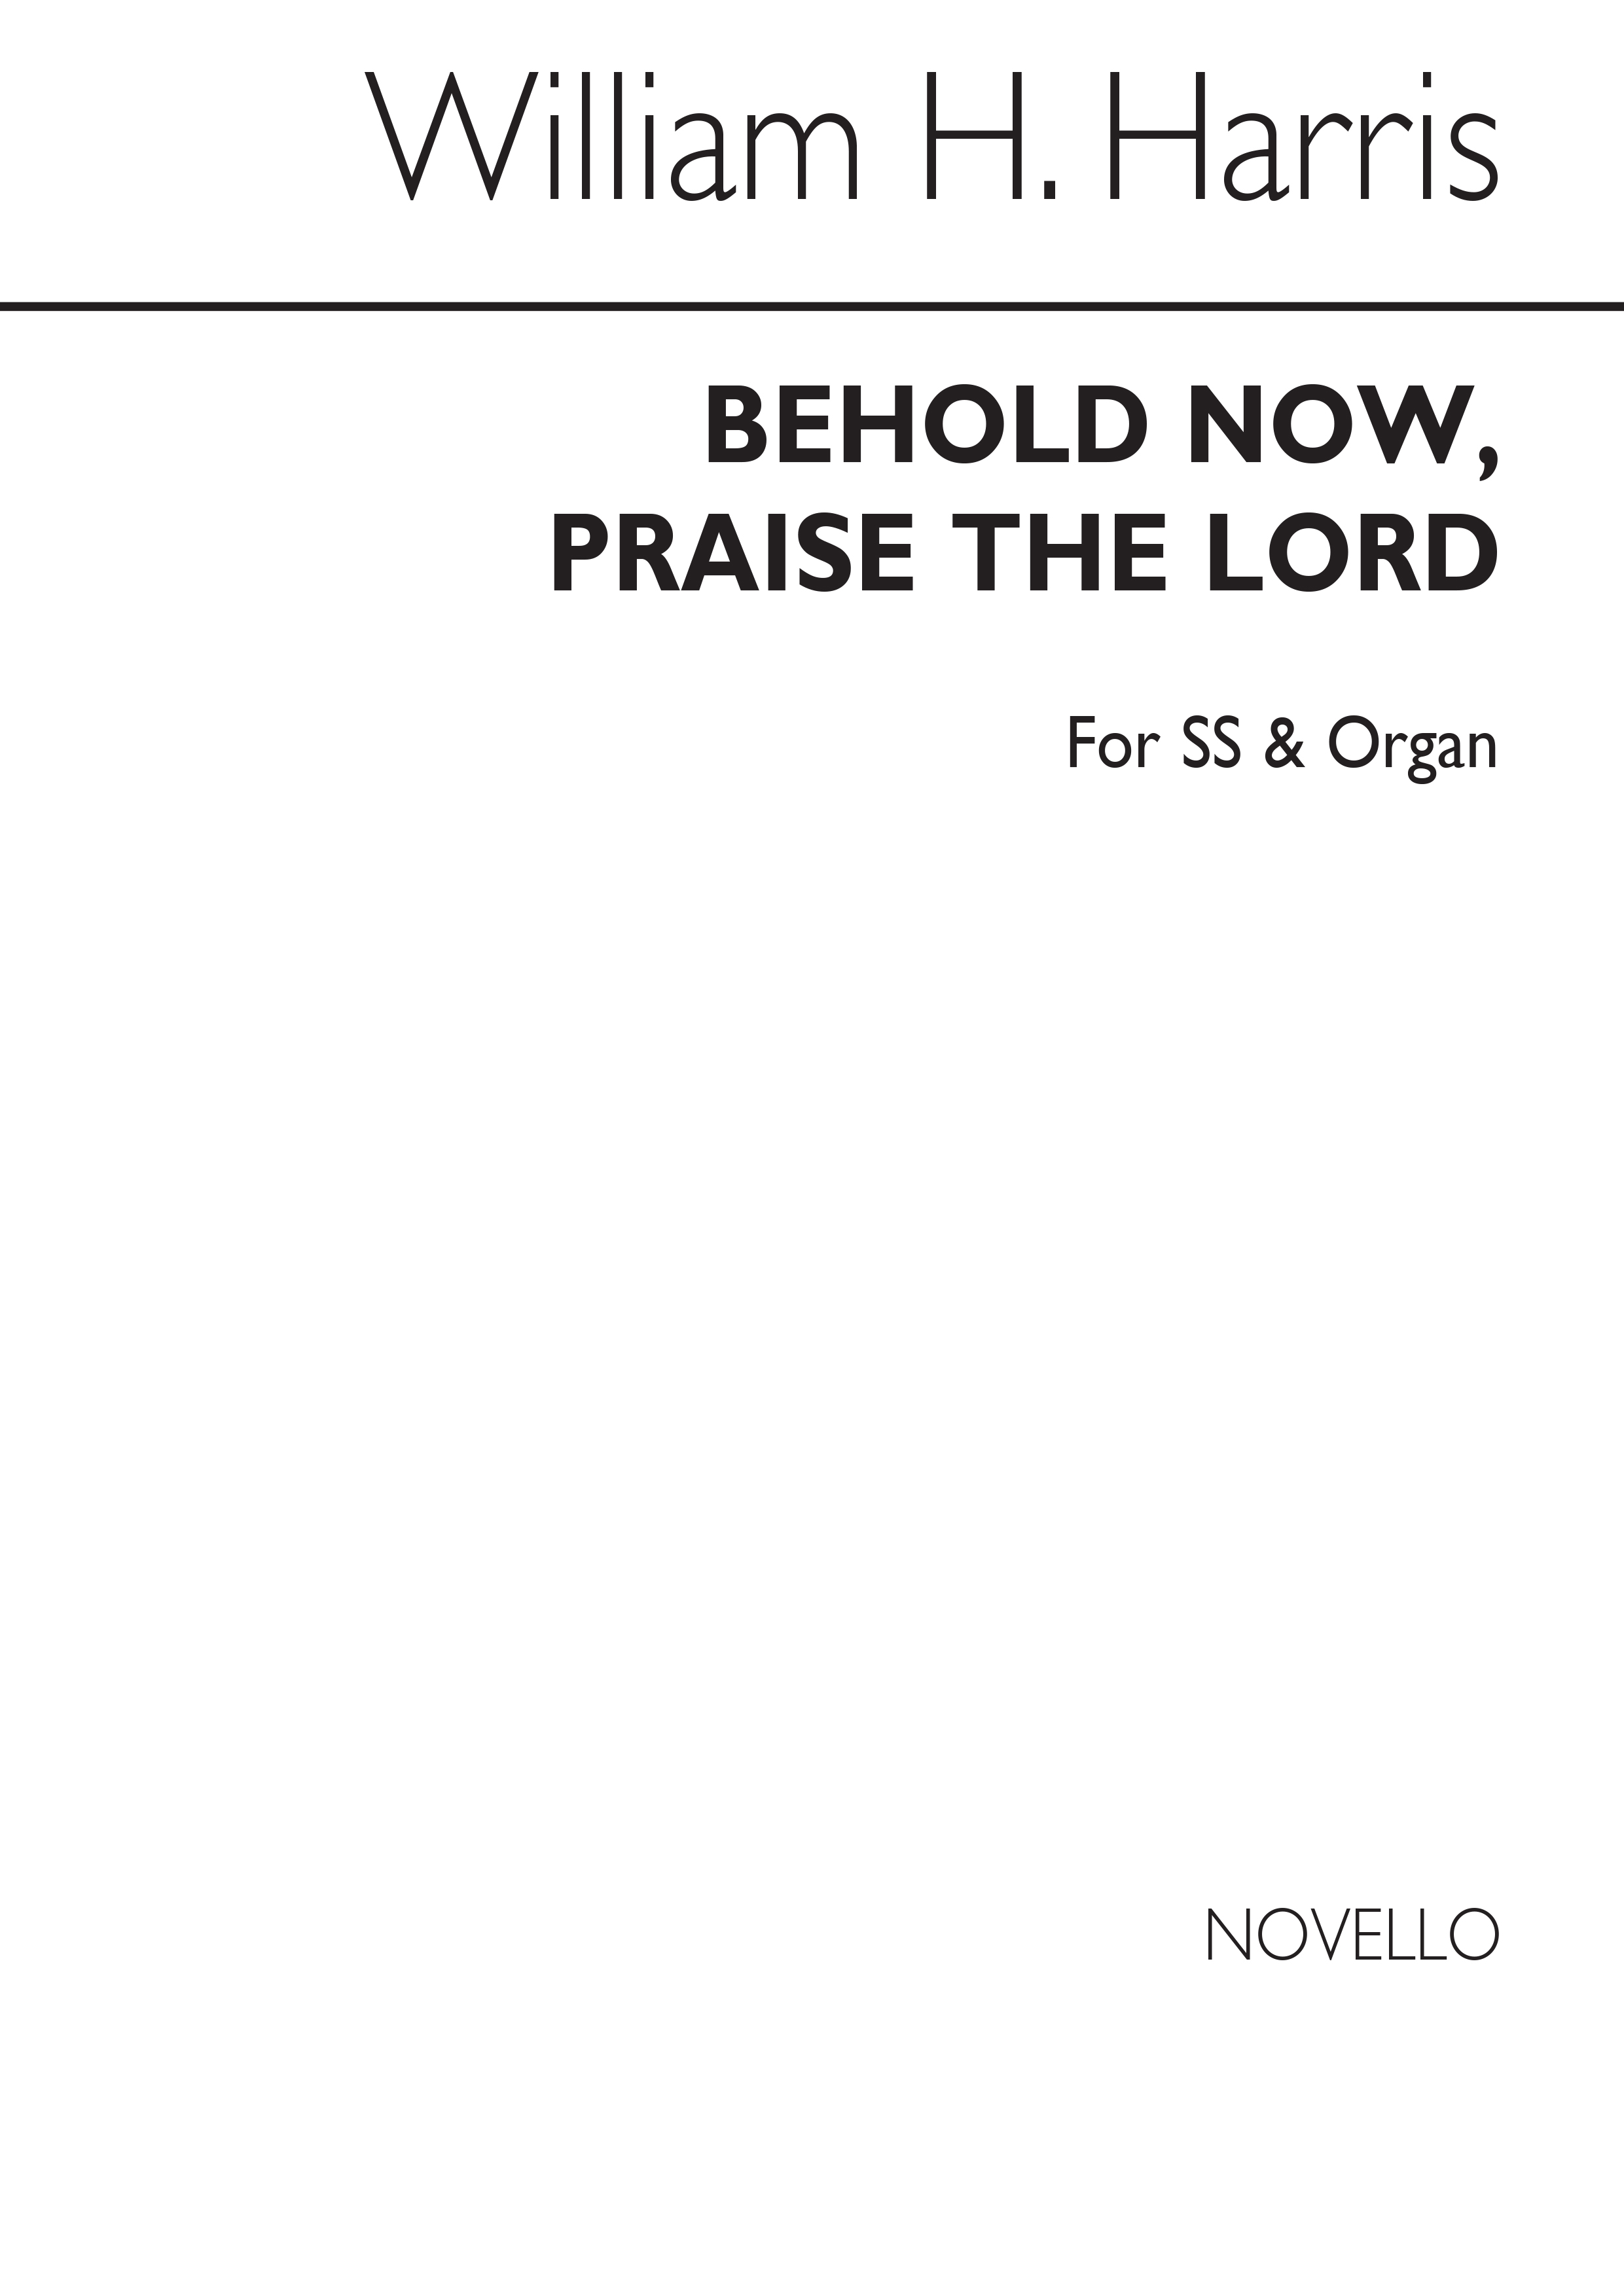 William H. Harris: Behold Now Praise The Lord